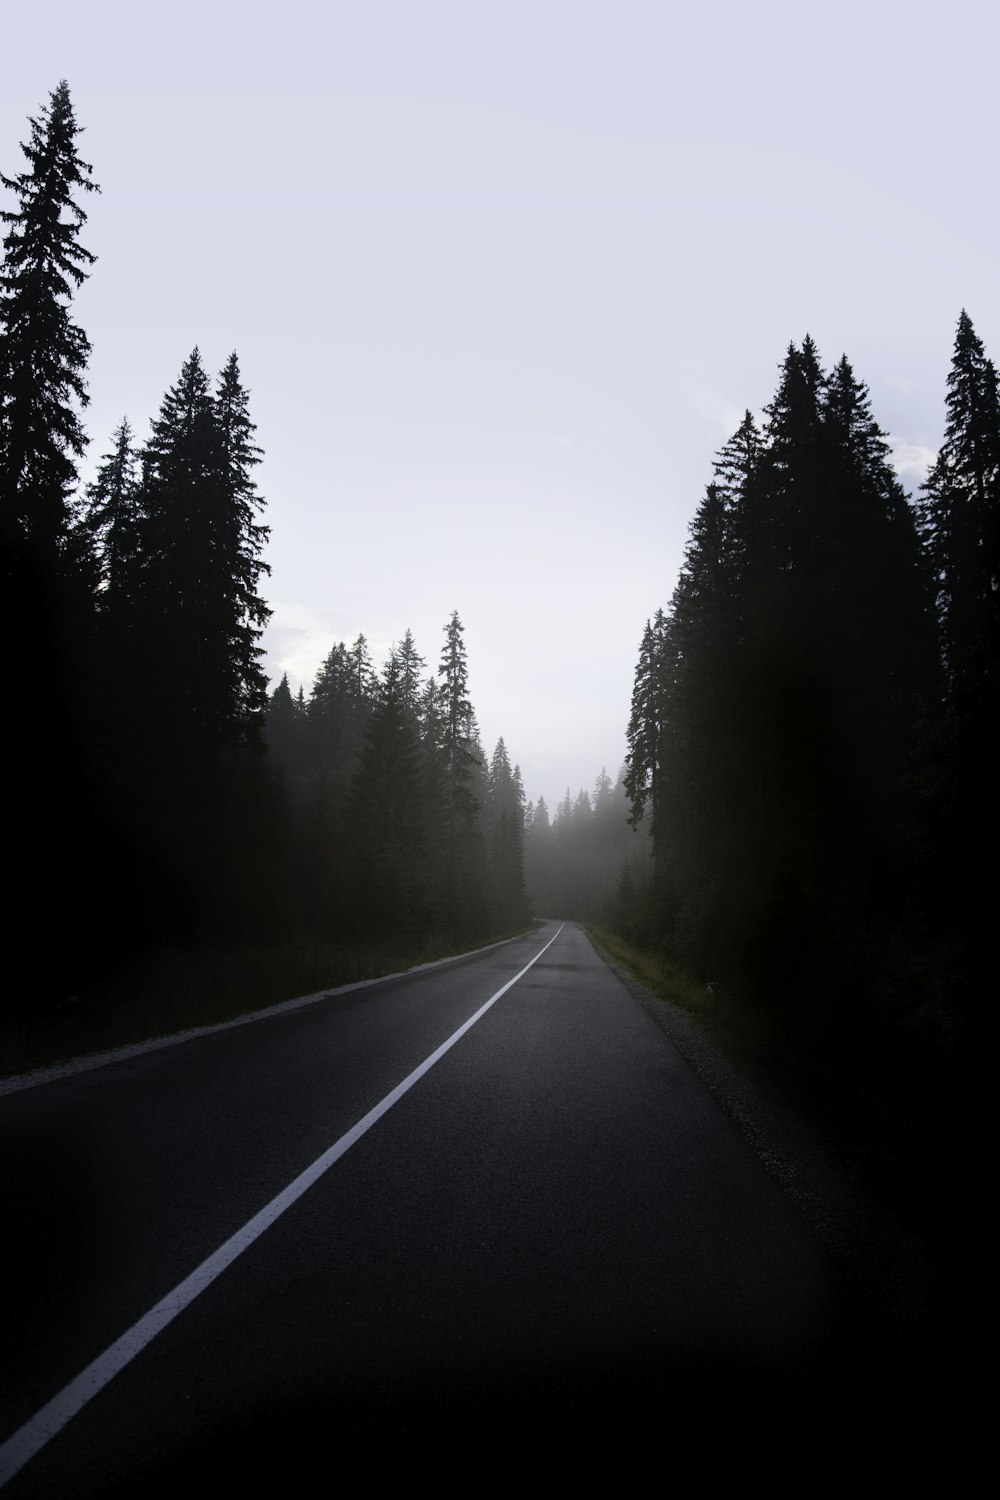 gray asphalt road between trees during foggy day